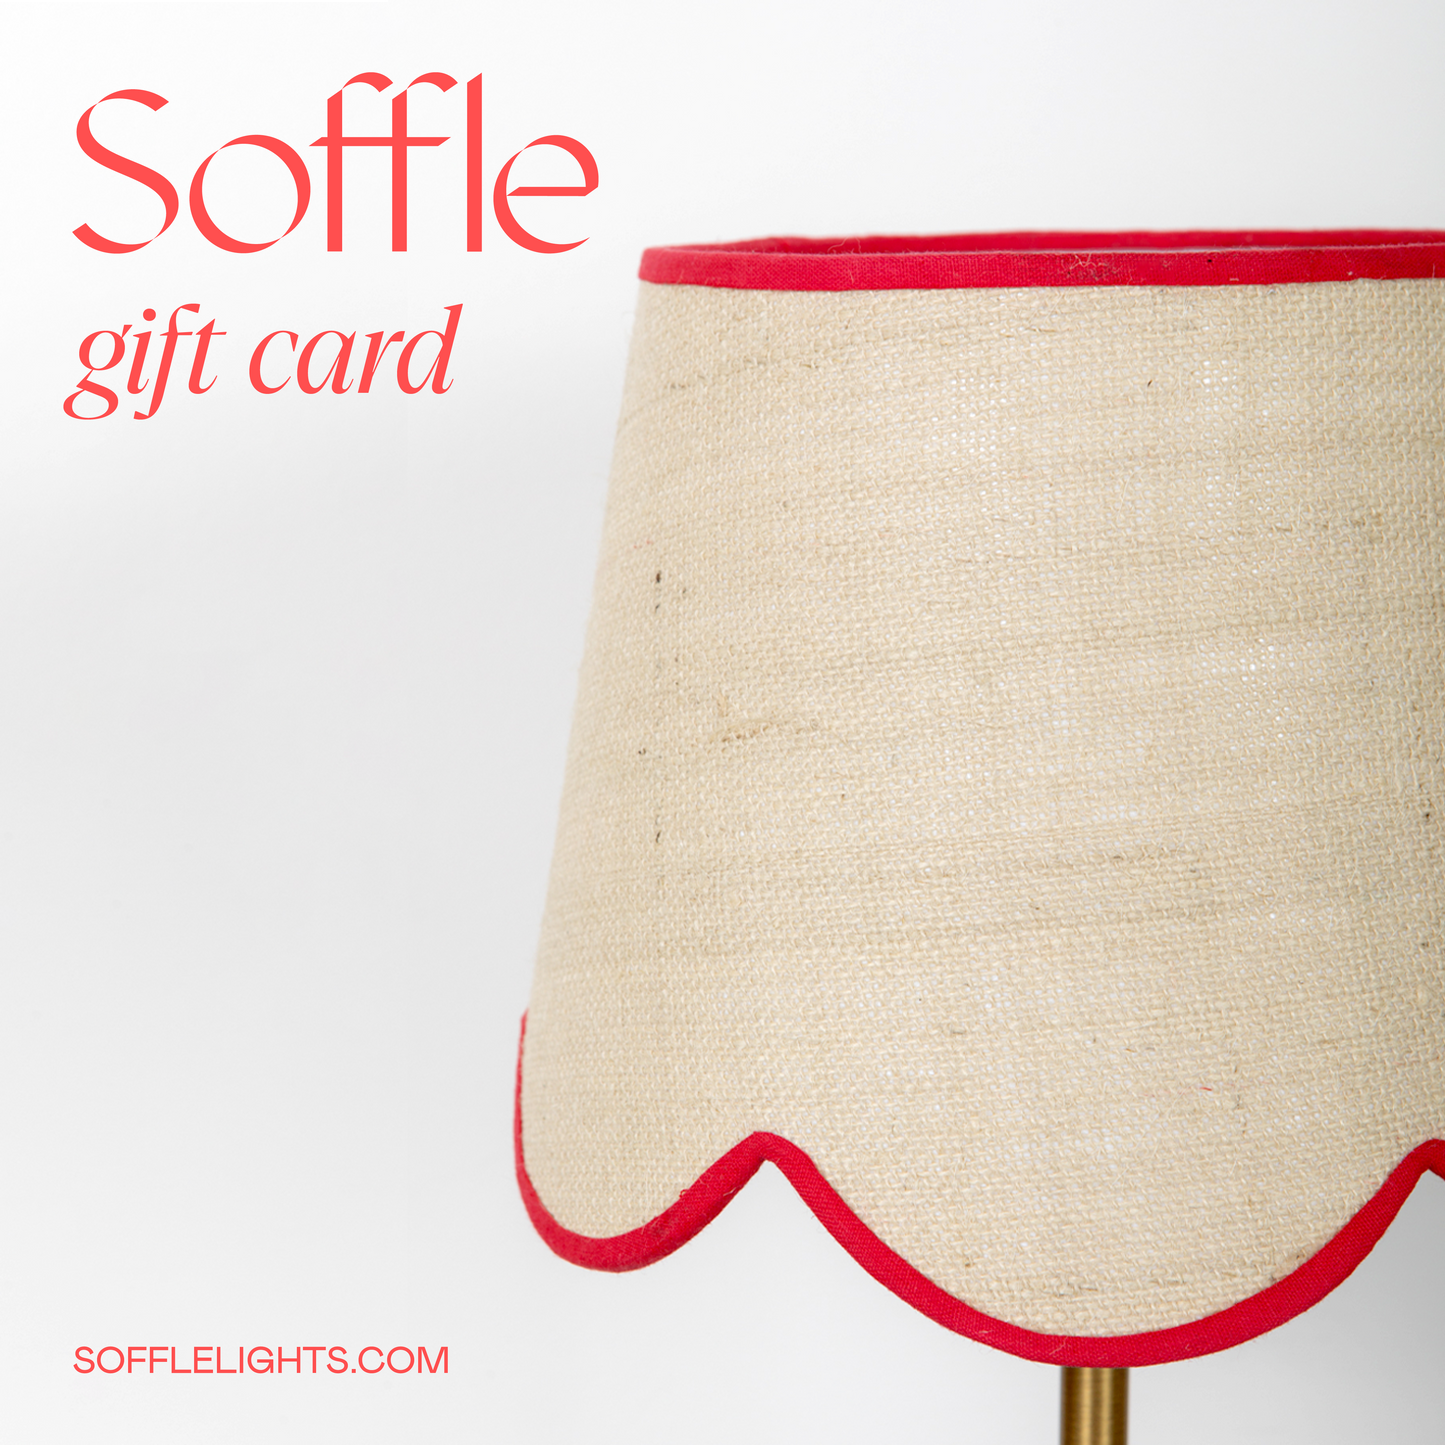 Soffle gift card